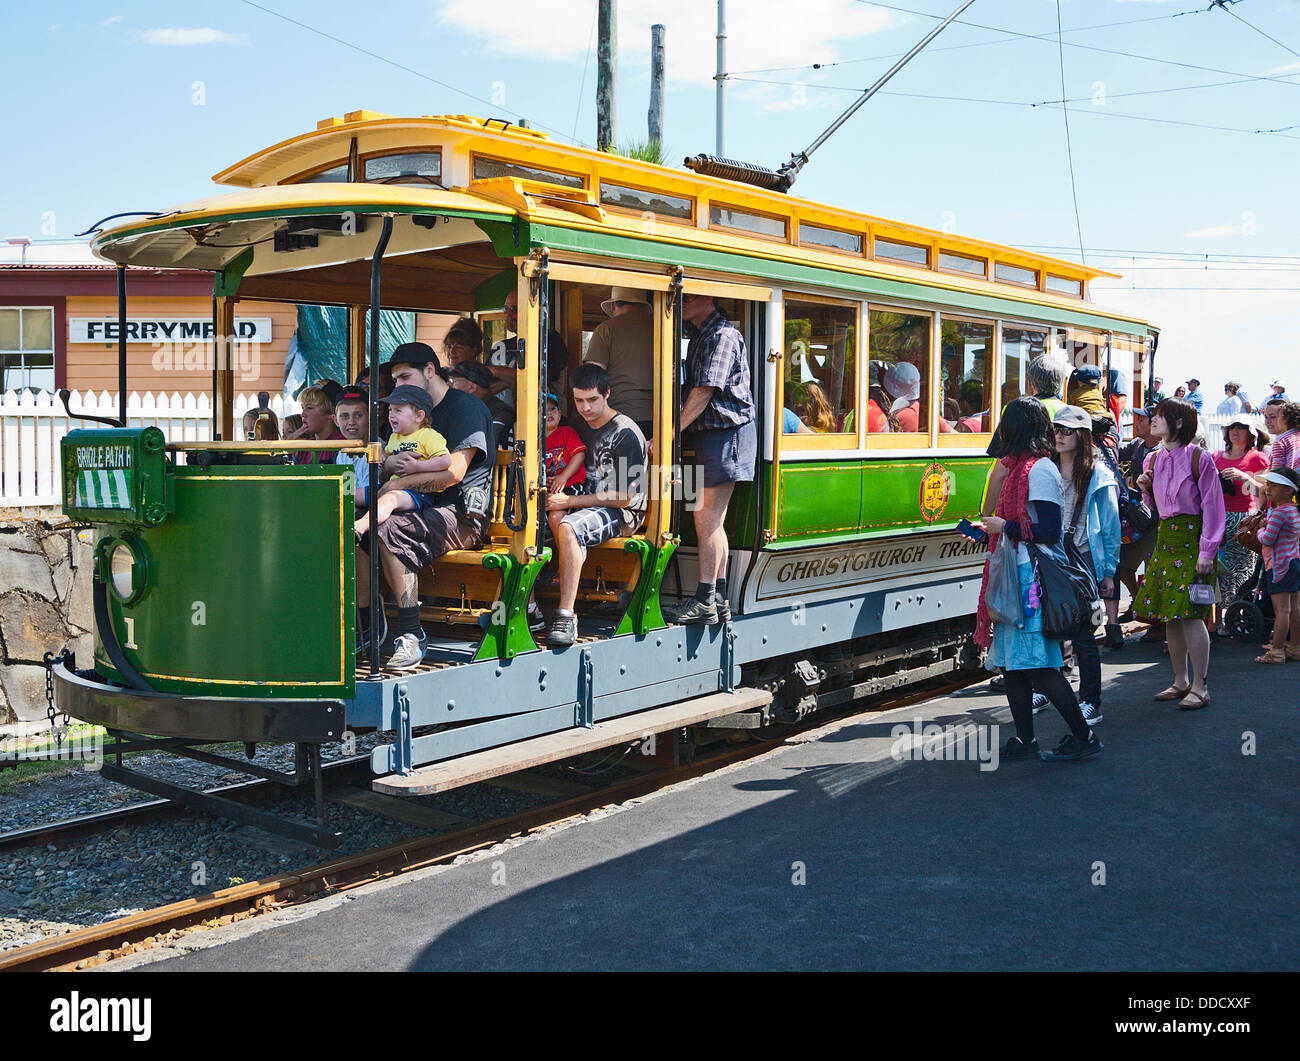 Families on board a vintage tram at the Ferrymead Heritage Park and museum, Christchurch, Canterbury, South Island, New Zealand. Stock Photo